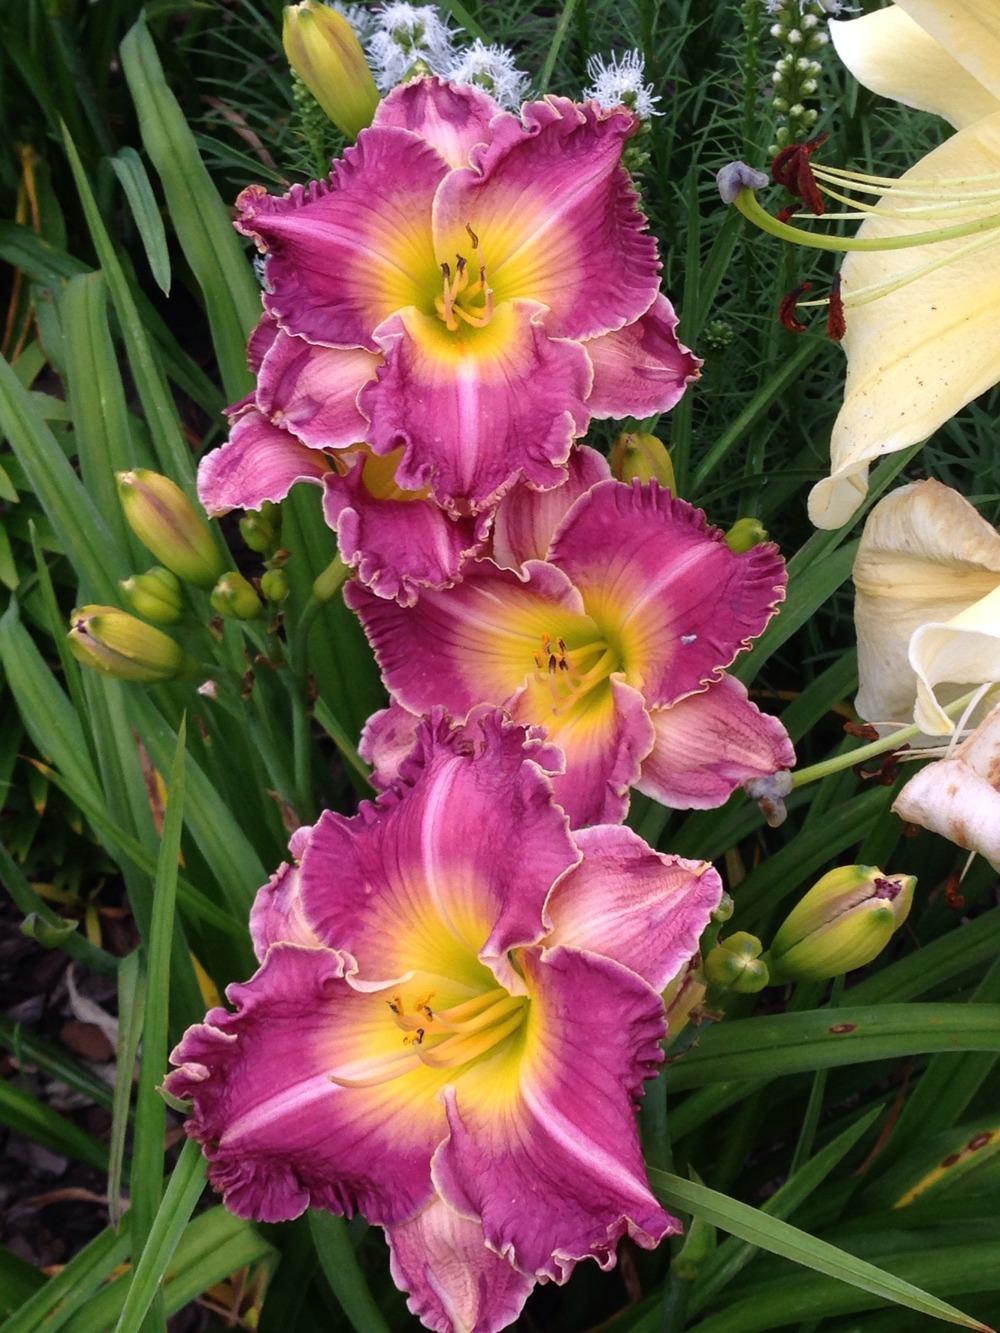 Photo of Daylily (Hemerocallis 'Filled to Overflowing') uploaded by Growgirl